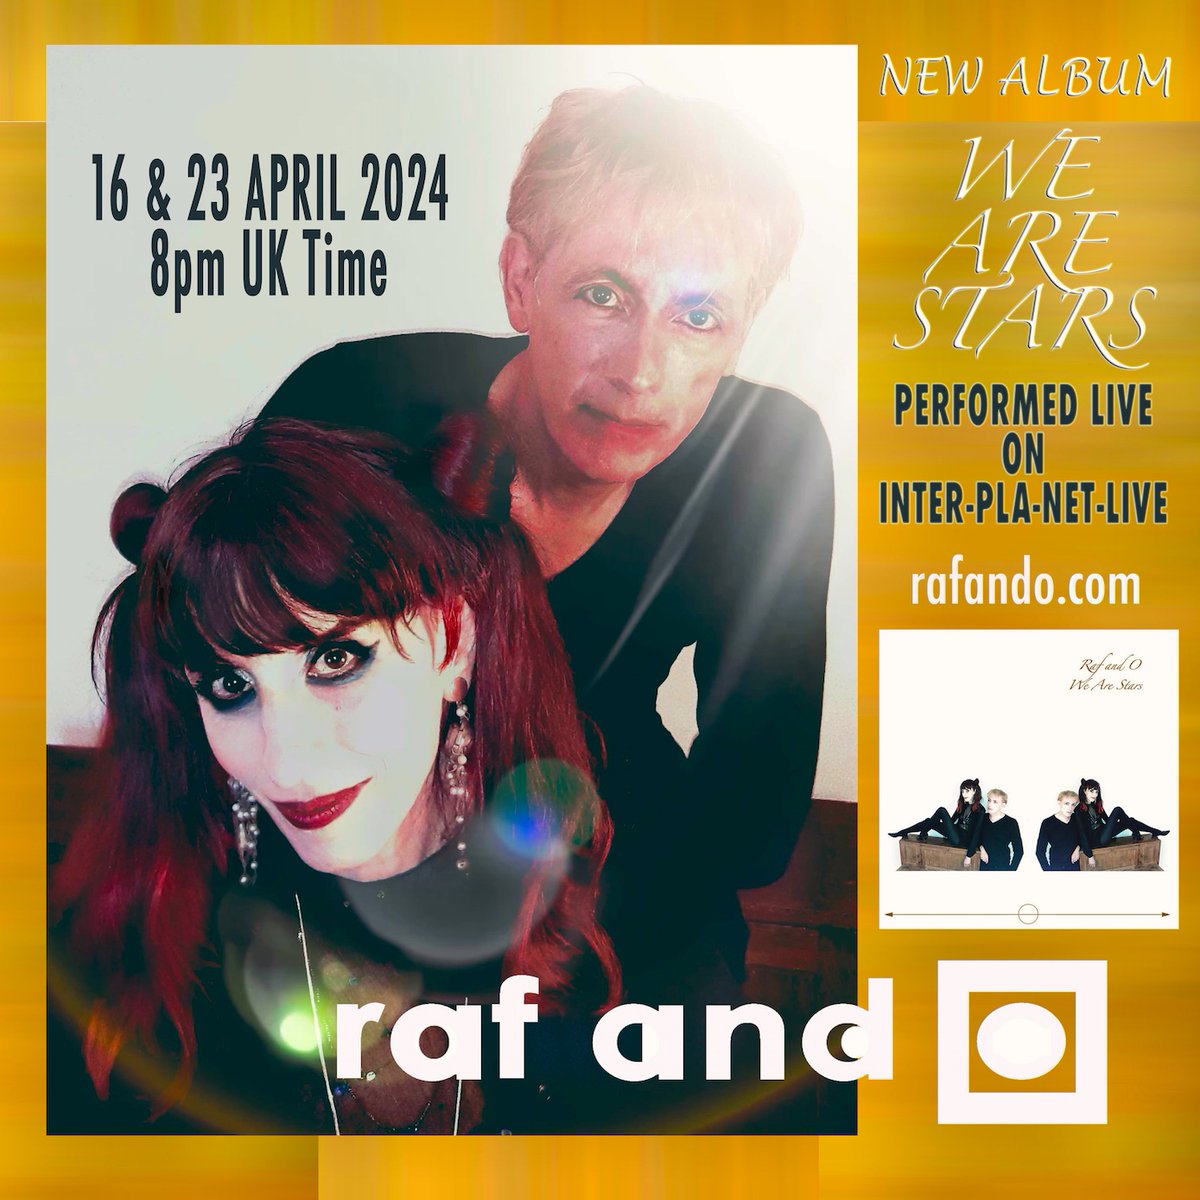 Following #RafAndO 's launch @ St Mark’s Regent’s Park, we're performing our new album #WeAreStars Live online in 2 parts Tue 16 & 23 Apr 8pm UK time. If you couldn’t catch the launch, now it’s your chance! 🌟✨ 1st show stageit.com/raf-and-o/1148… 2nd show stageit.com/raf-and-o/1148…